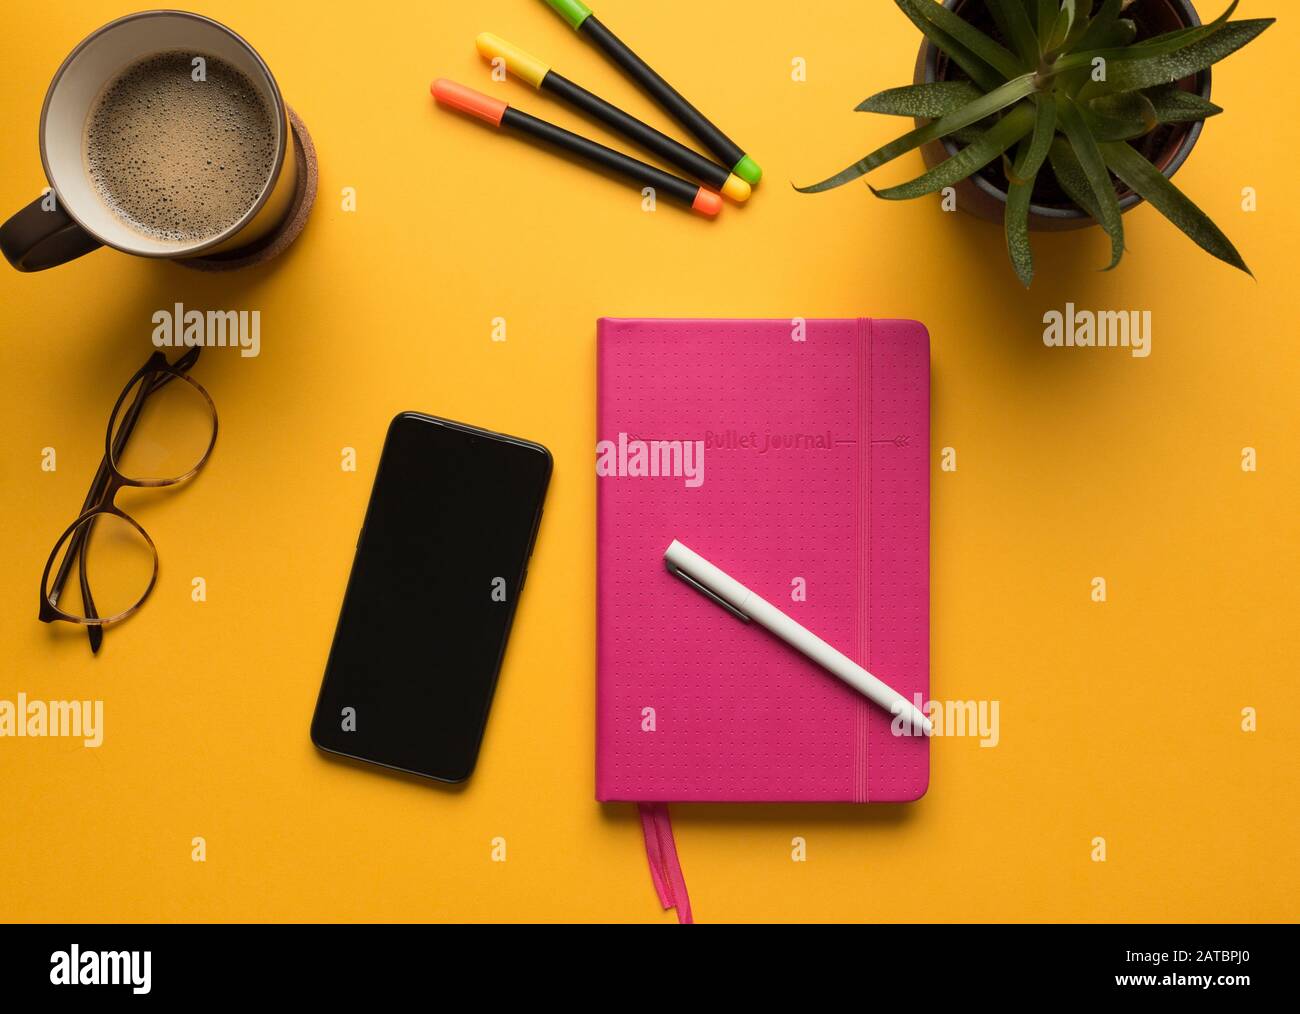 Stock photo of a pink diary with pencil, mobile phone and some desktop objects on a yellow background Stock Photo